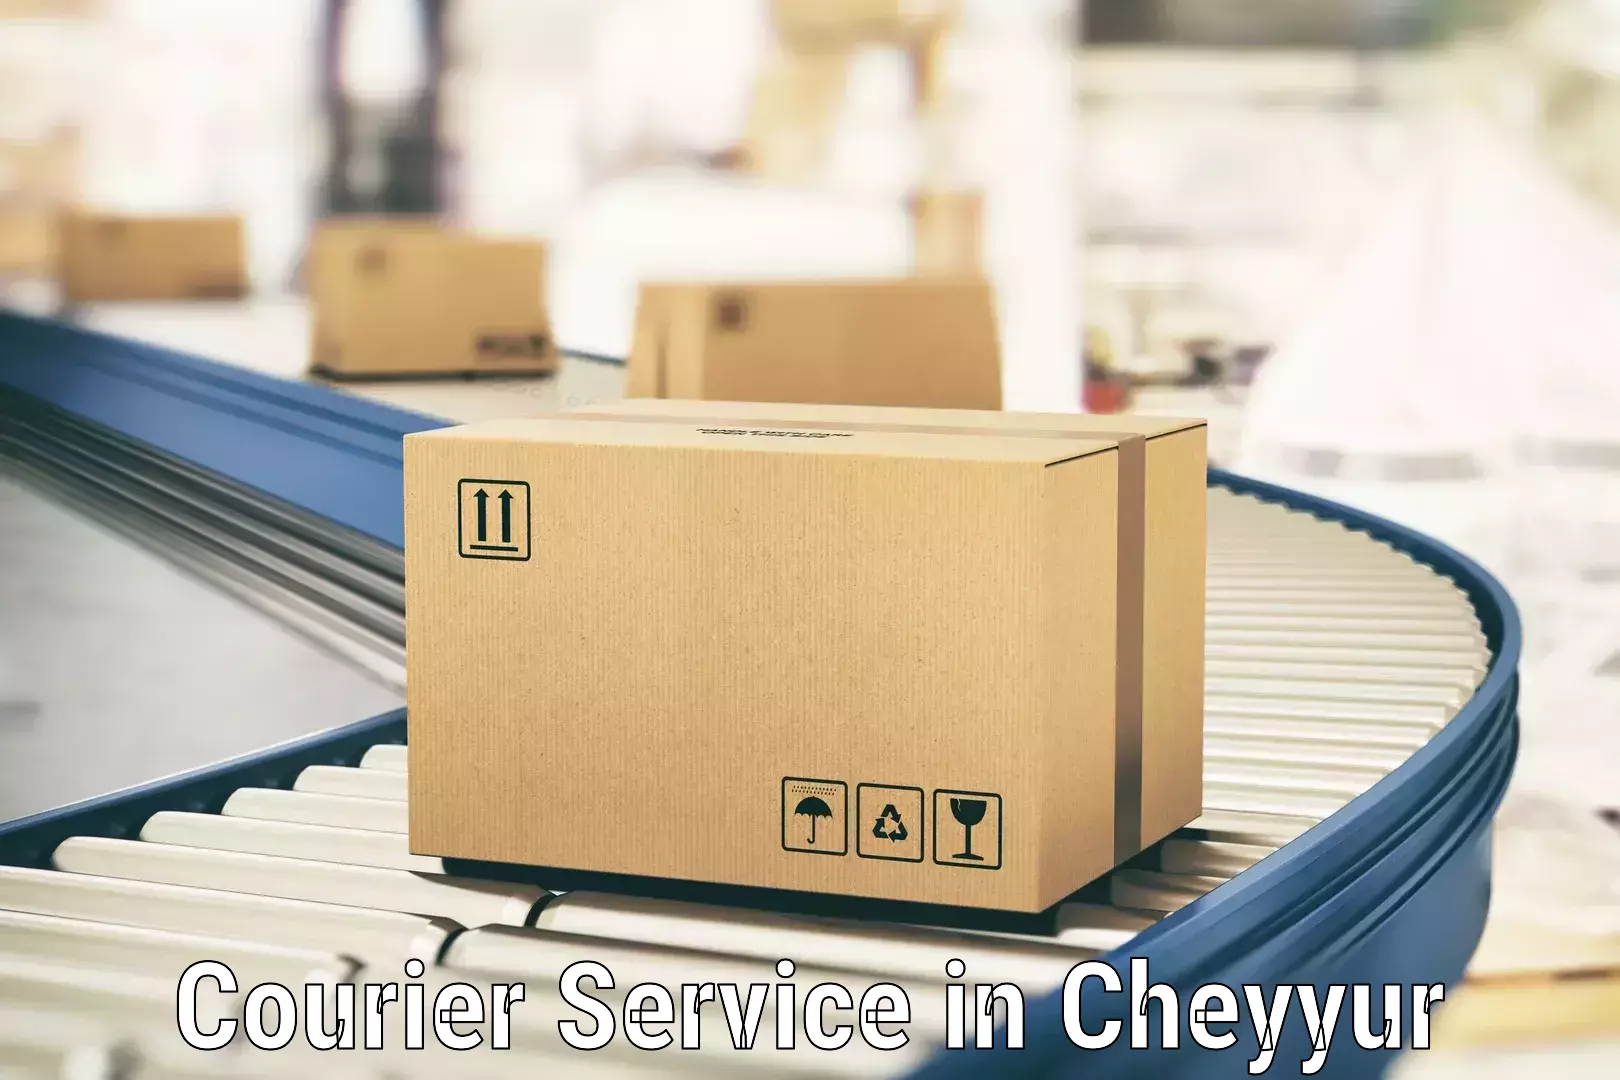 Full-service courier options in Cheyyur